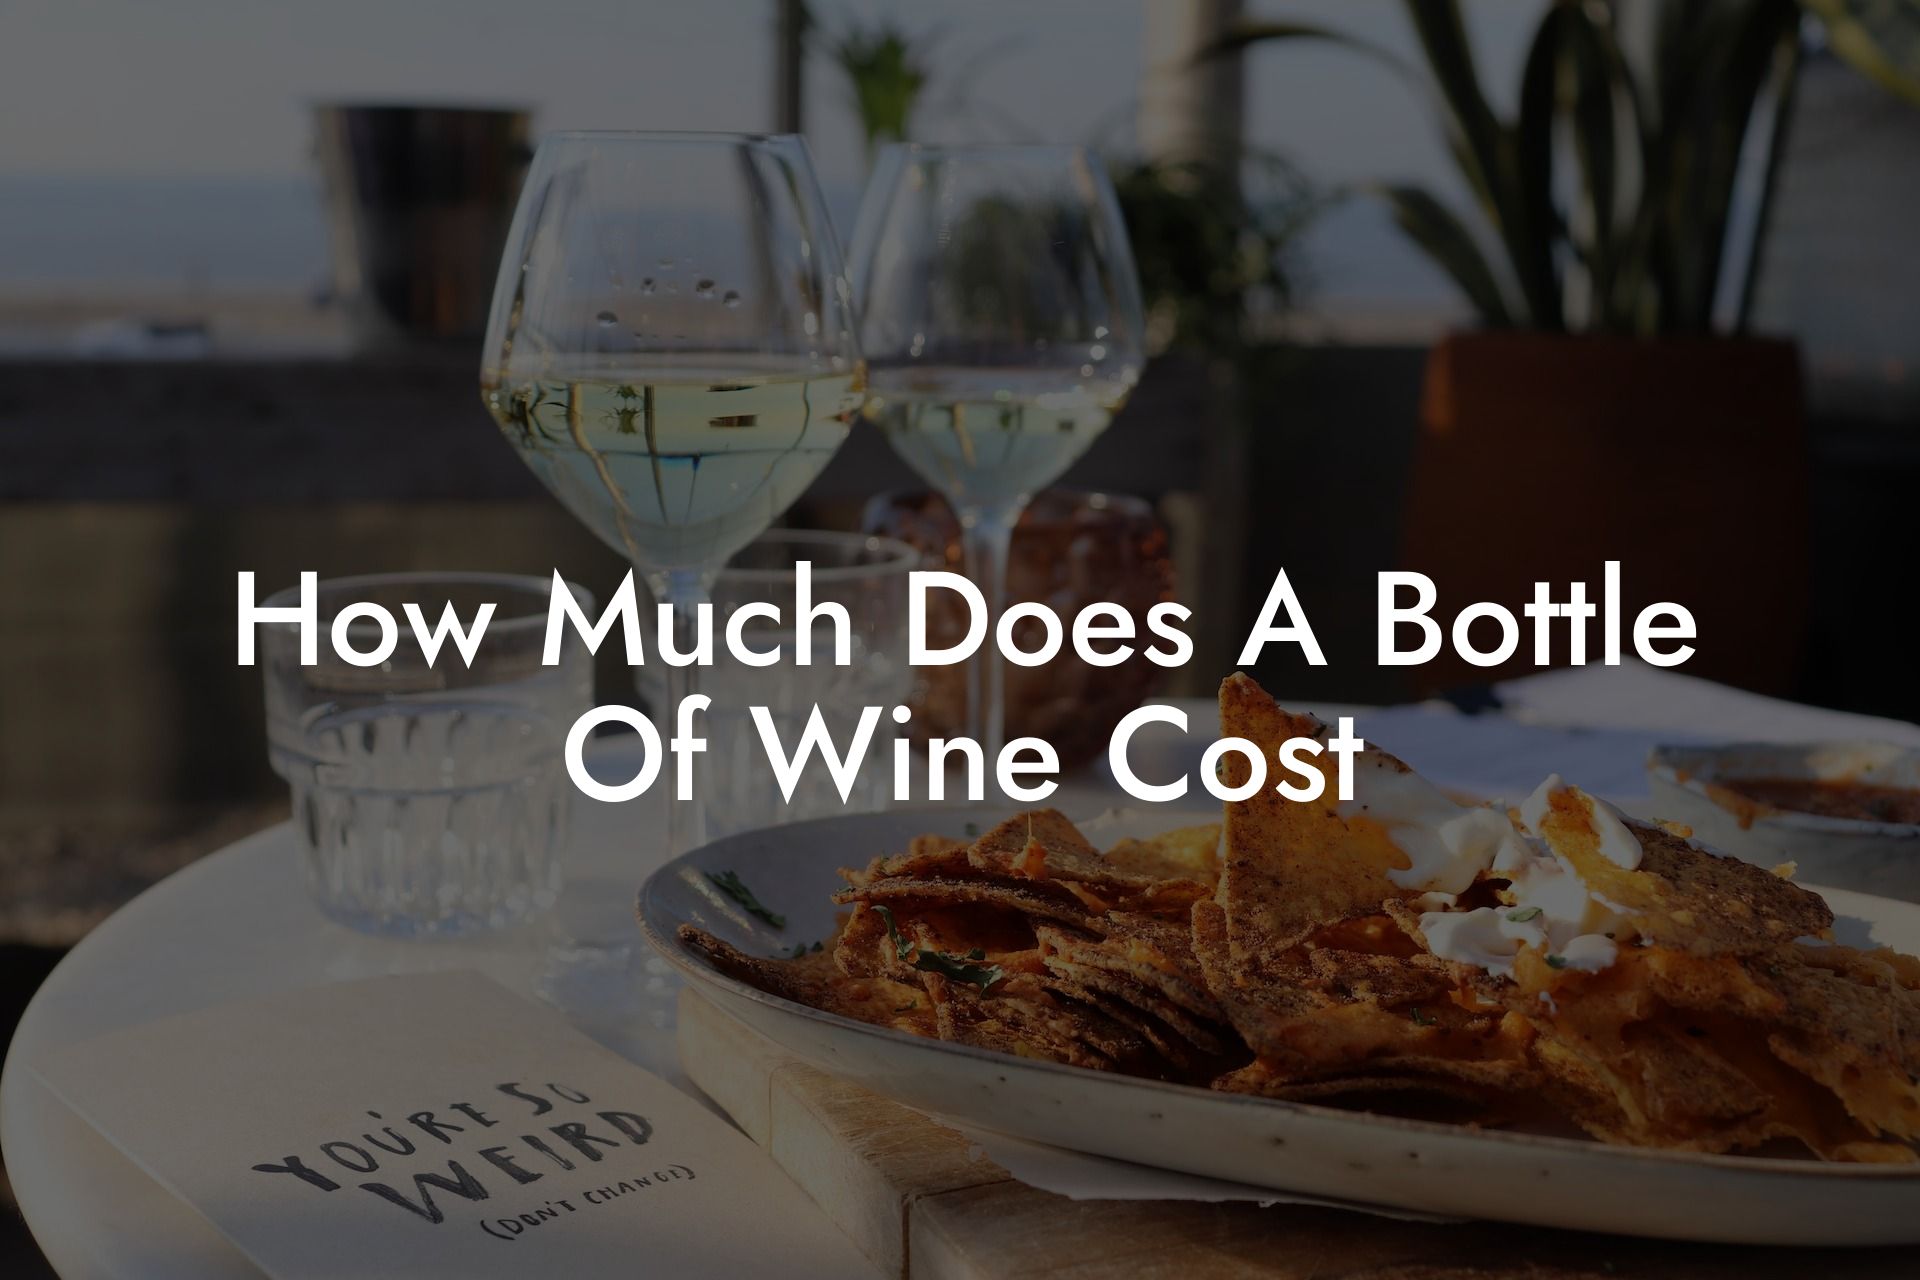 How Much Does A Bottle Of Wine Cost